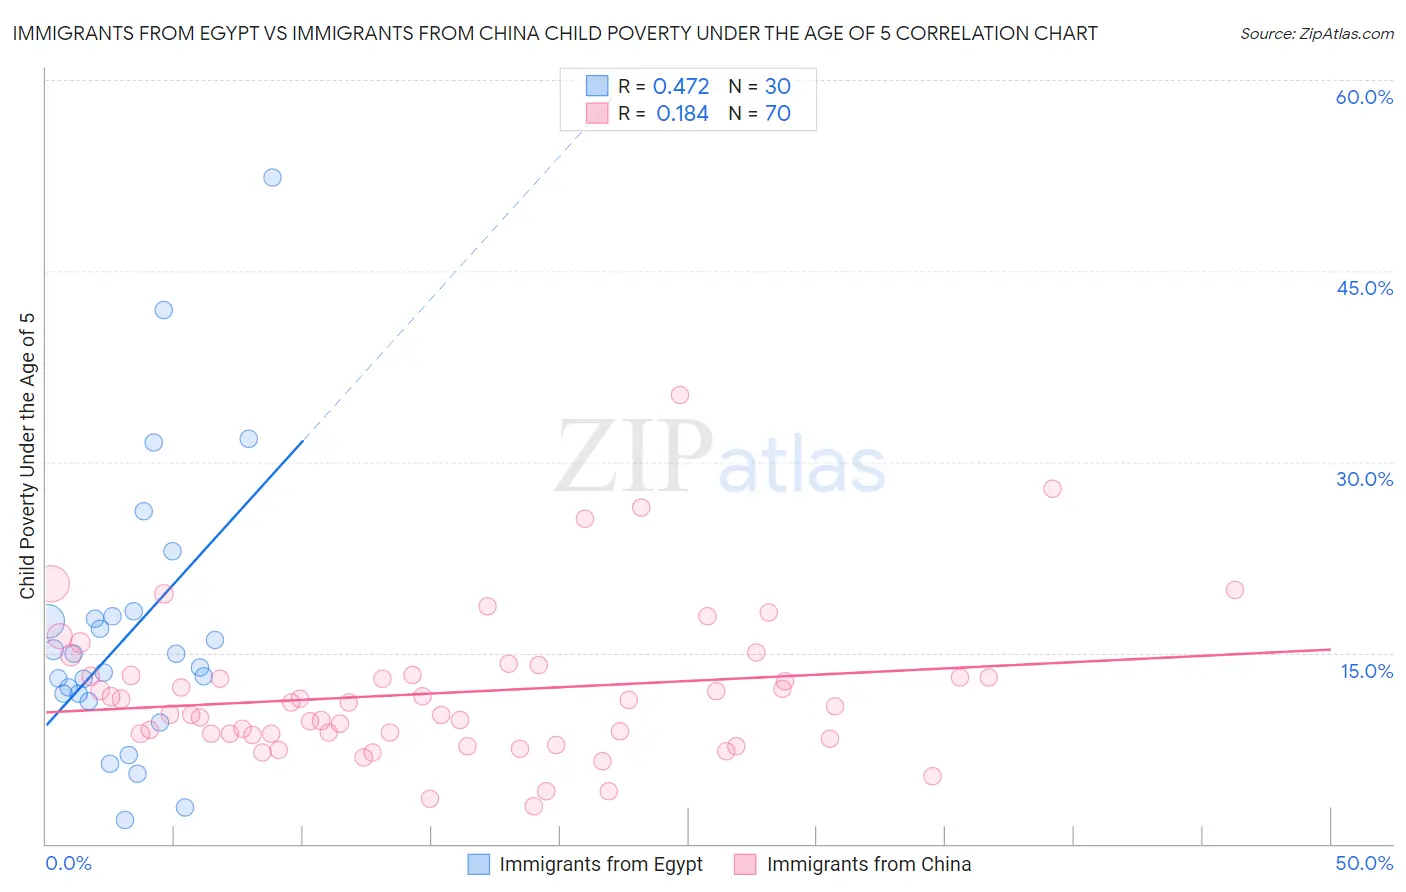 Immigrants from Egypt vs Immigrants from China Child Poverty Under the Age of 5